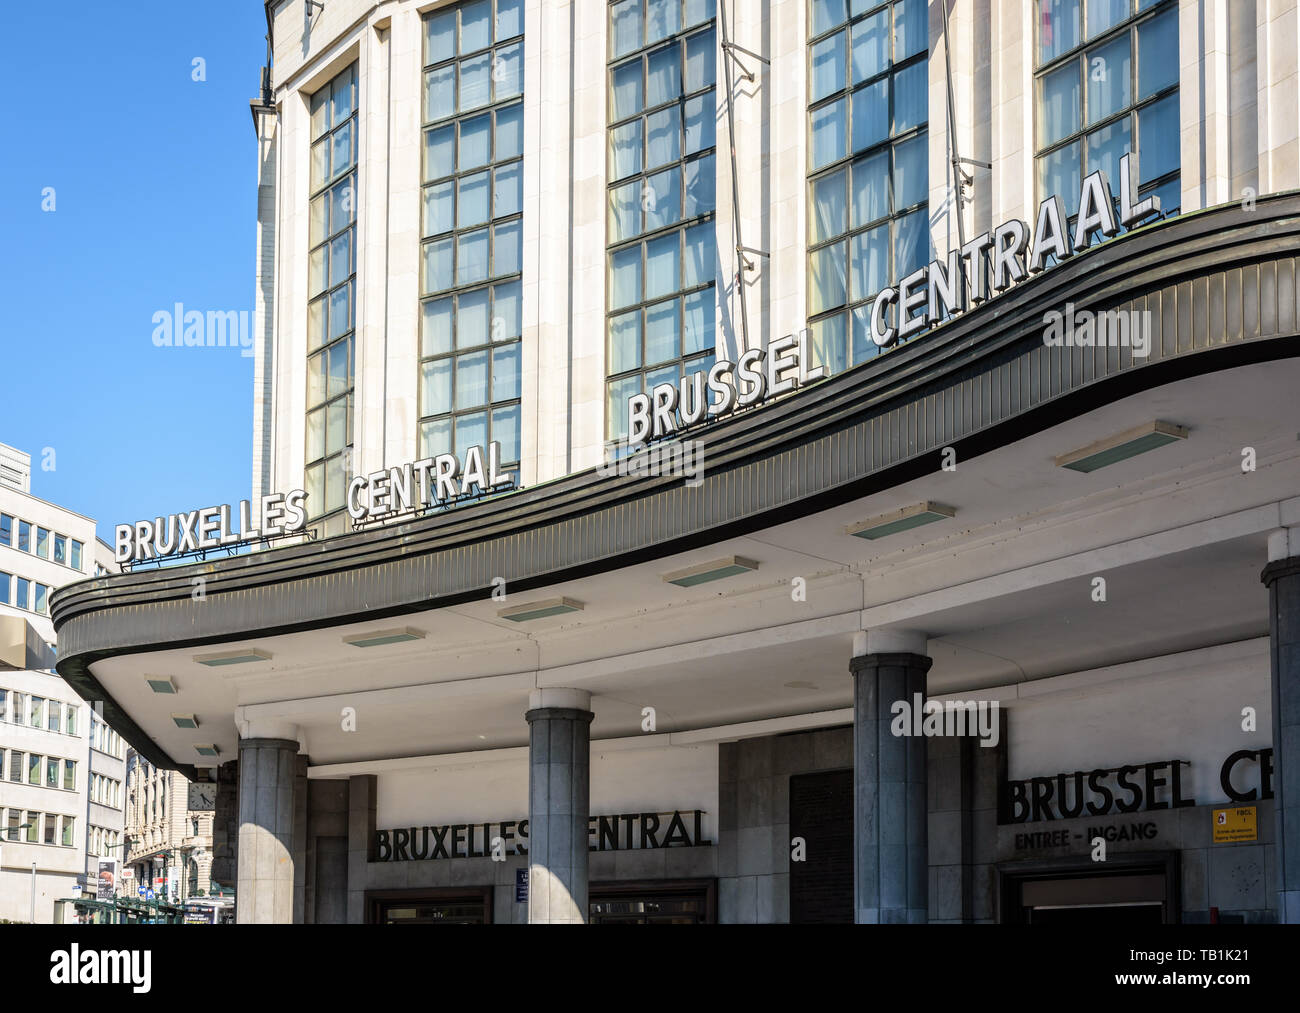 Bruxelles Central and Brussel Centraal, the french and dutch names of the central train station, displayed in white letters above the main entrance. Stock Photo